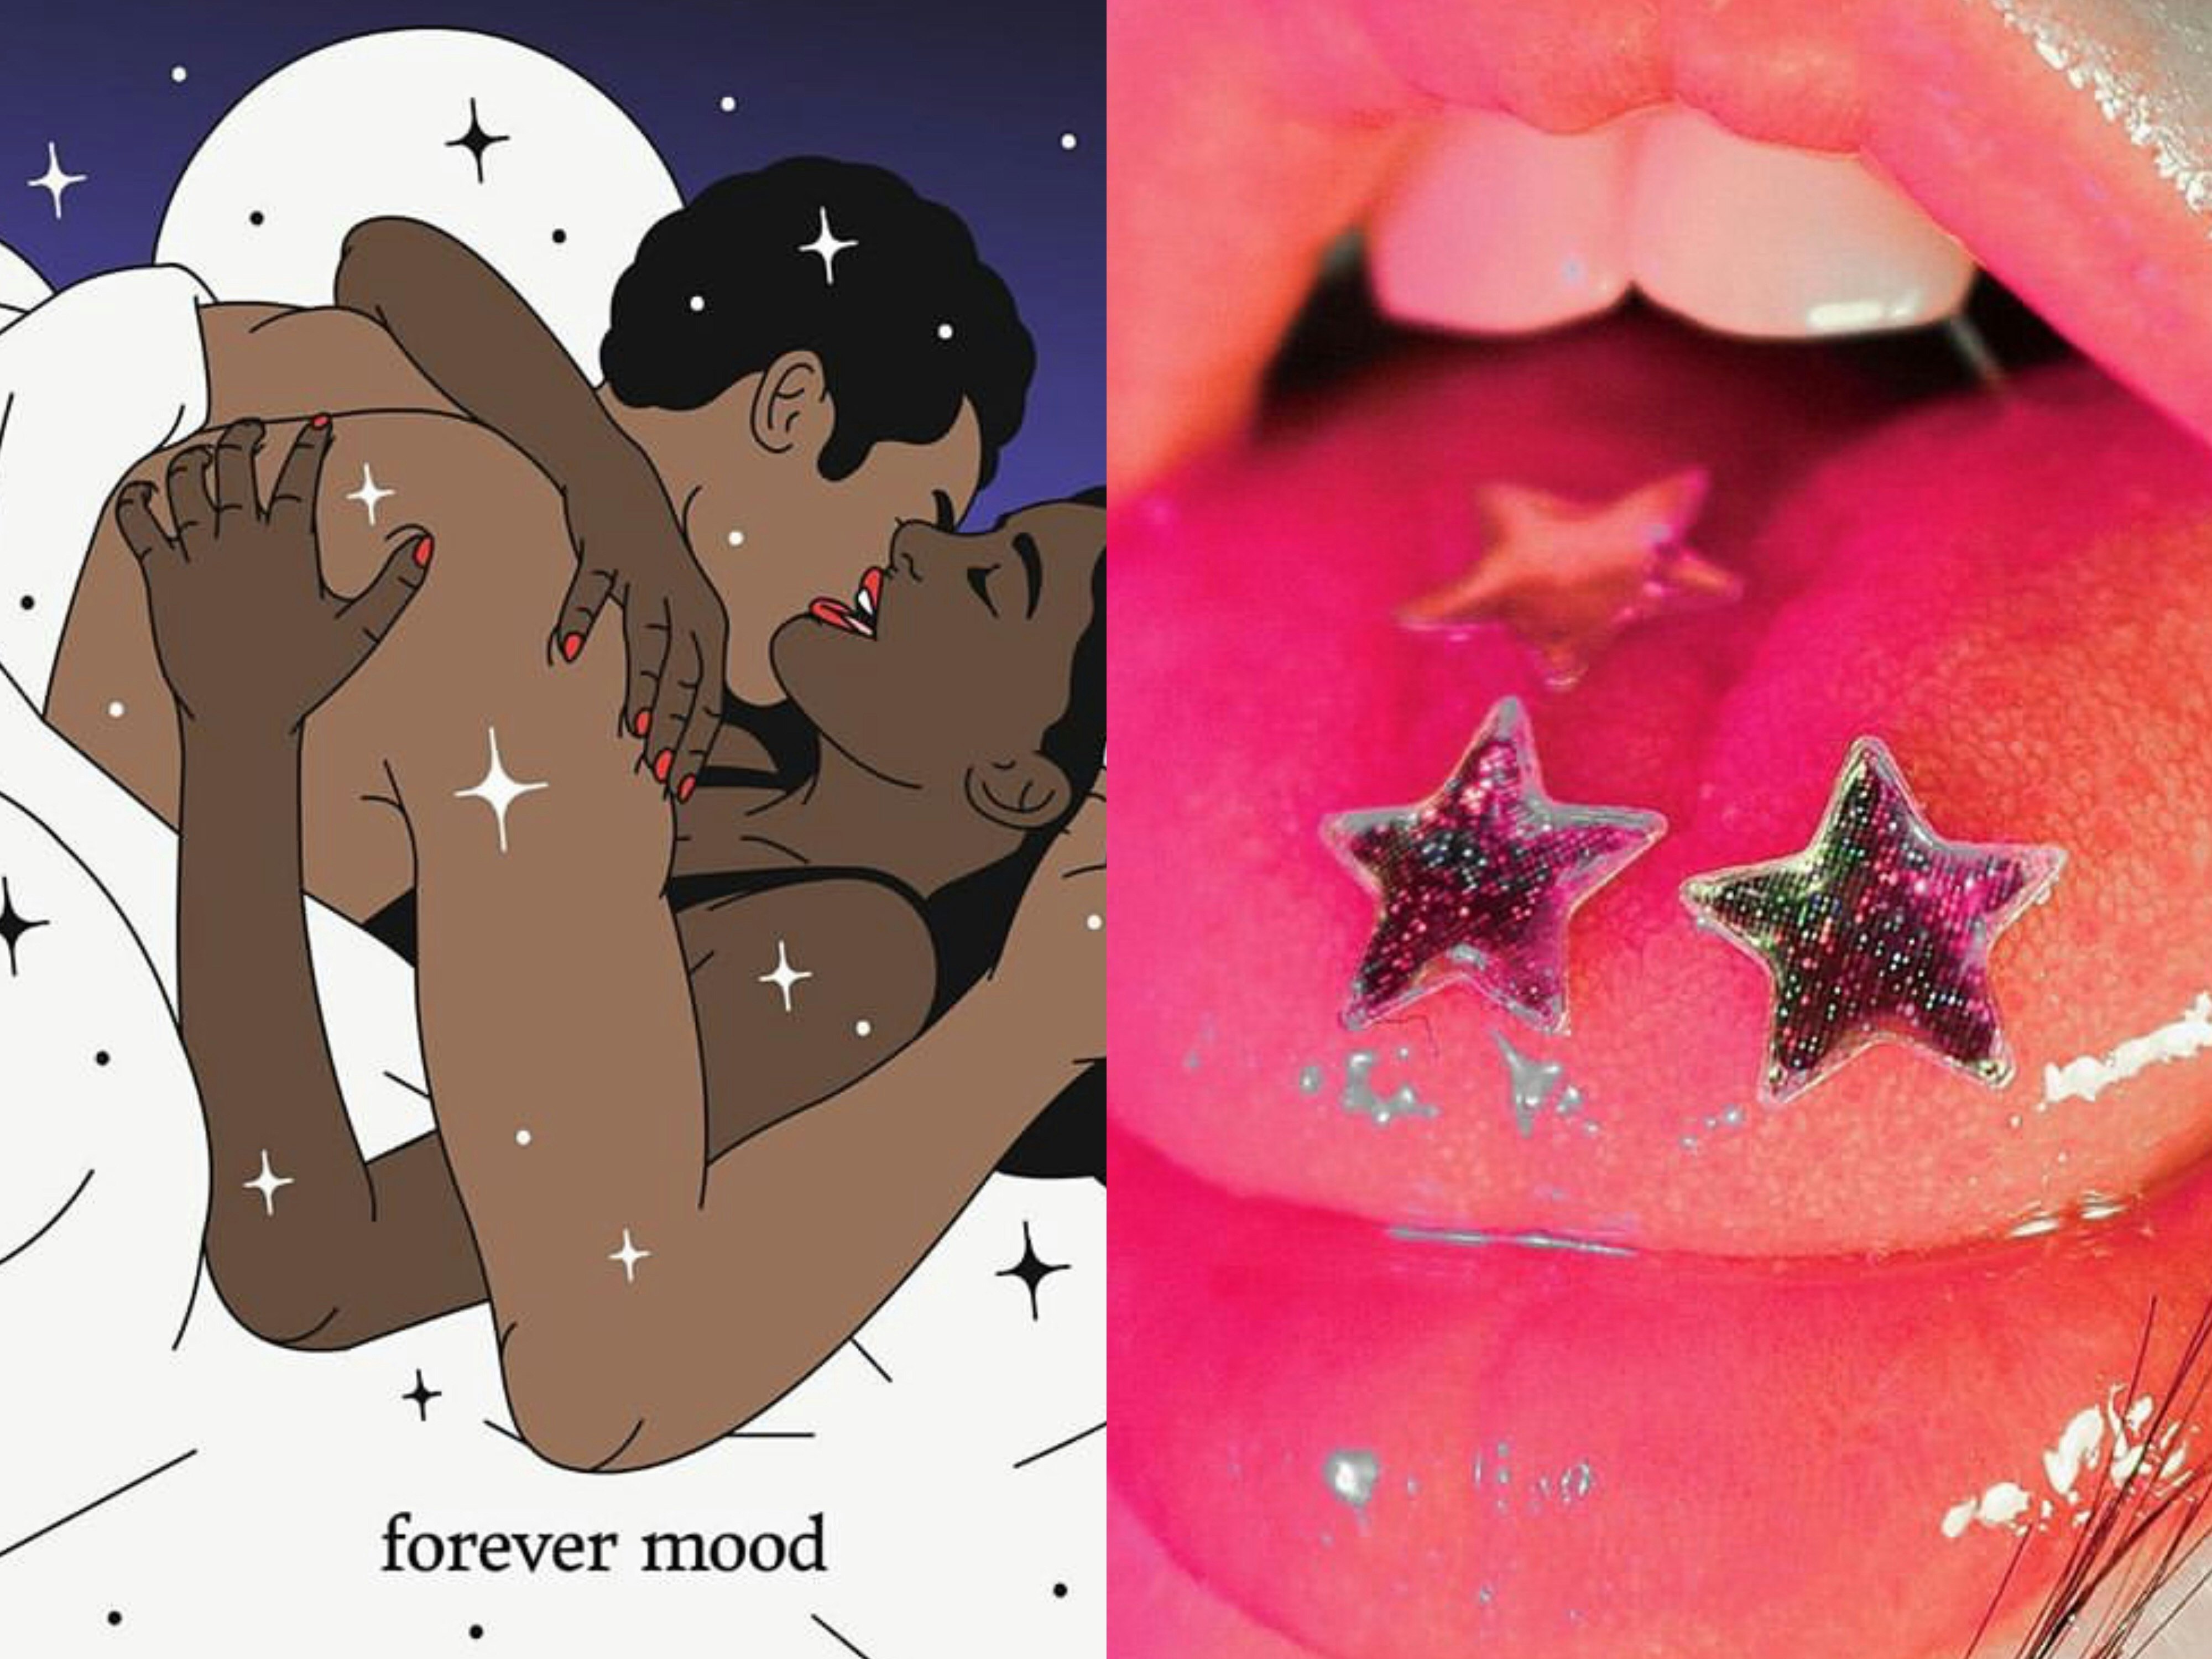 French Sex Illustrations - 14 Best Sex-Positive Instagram Accounts You Need To Follow ...